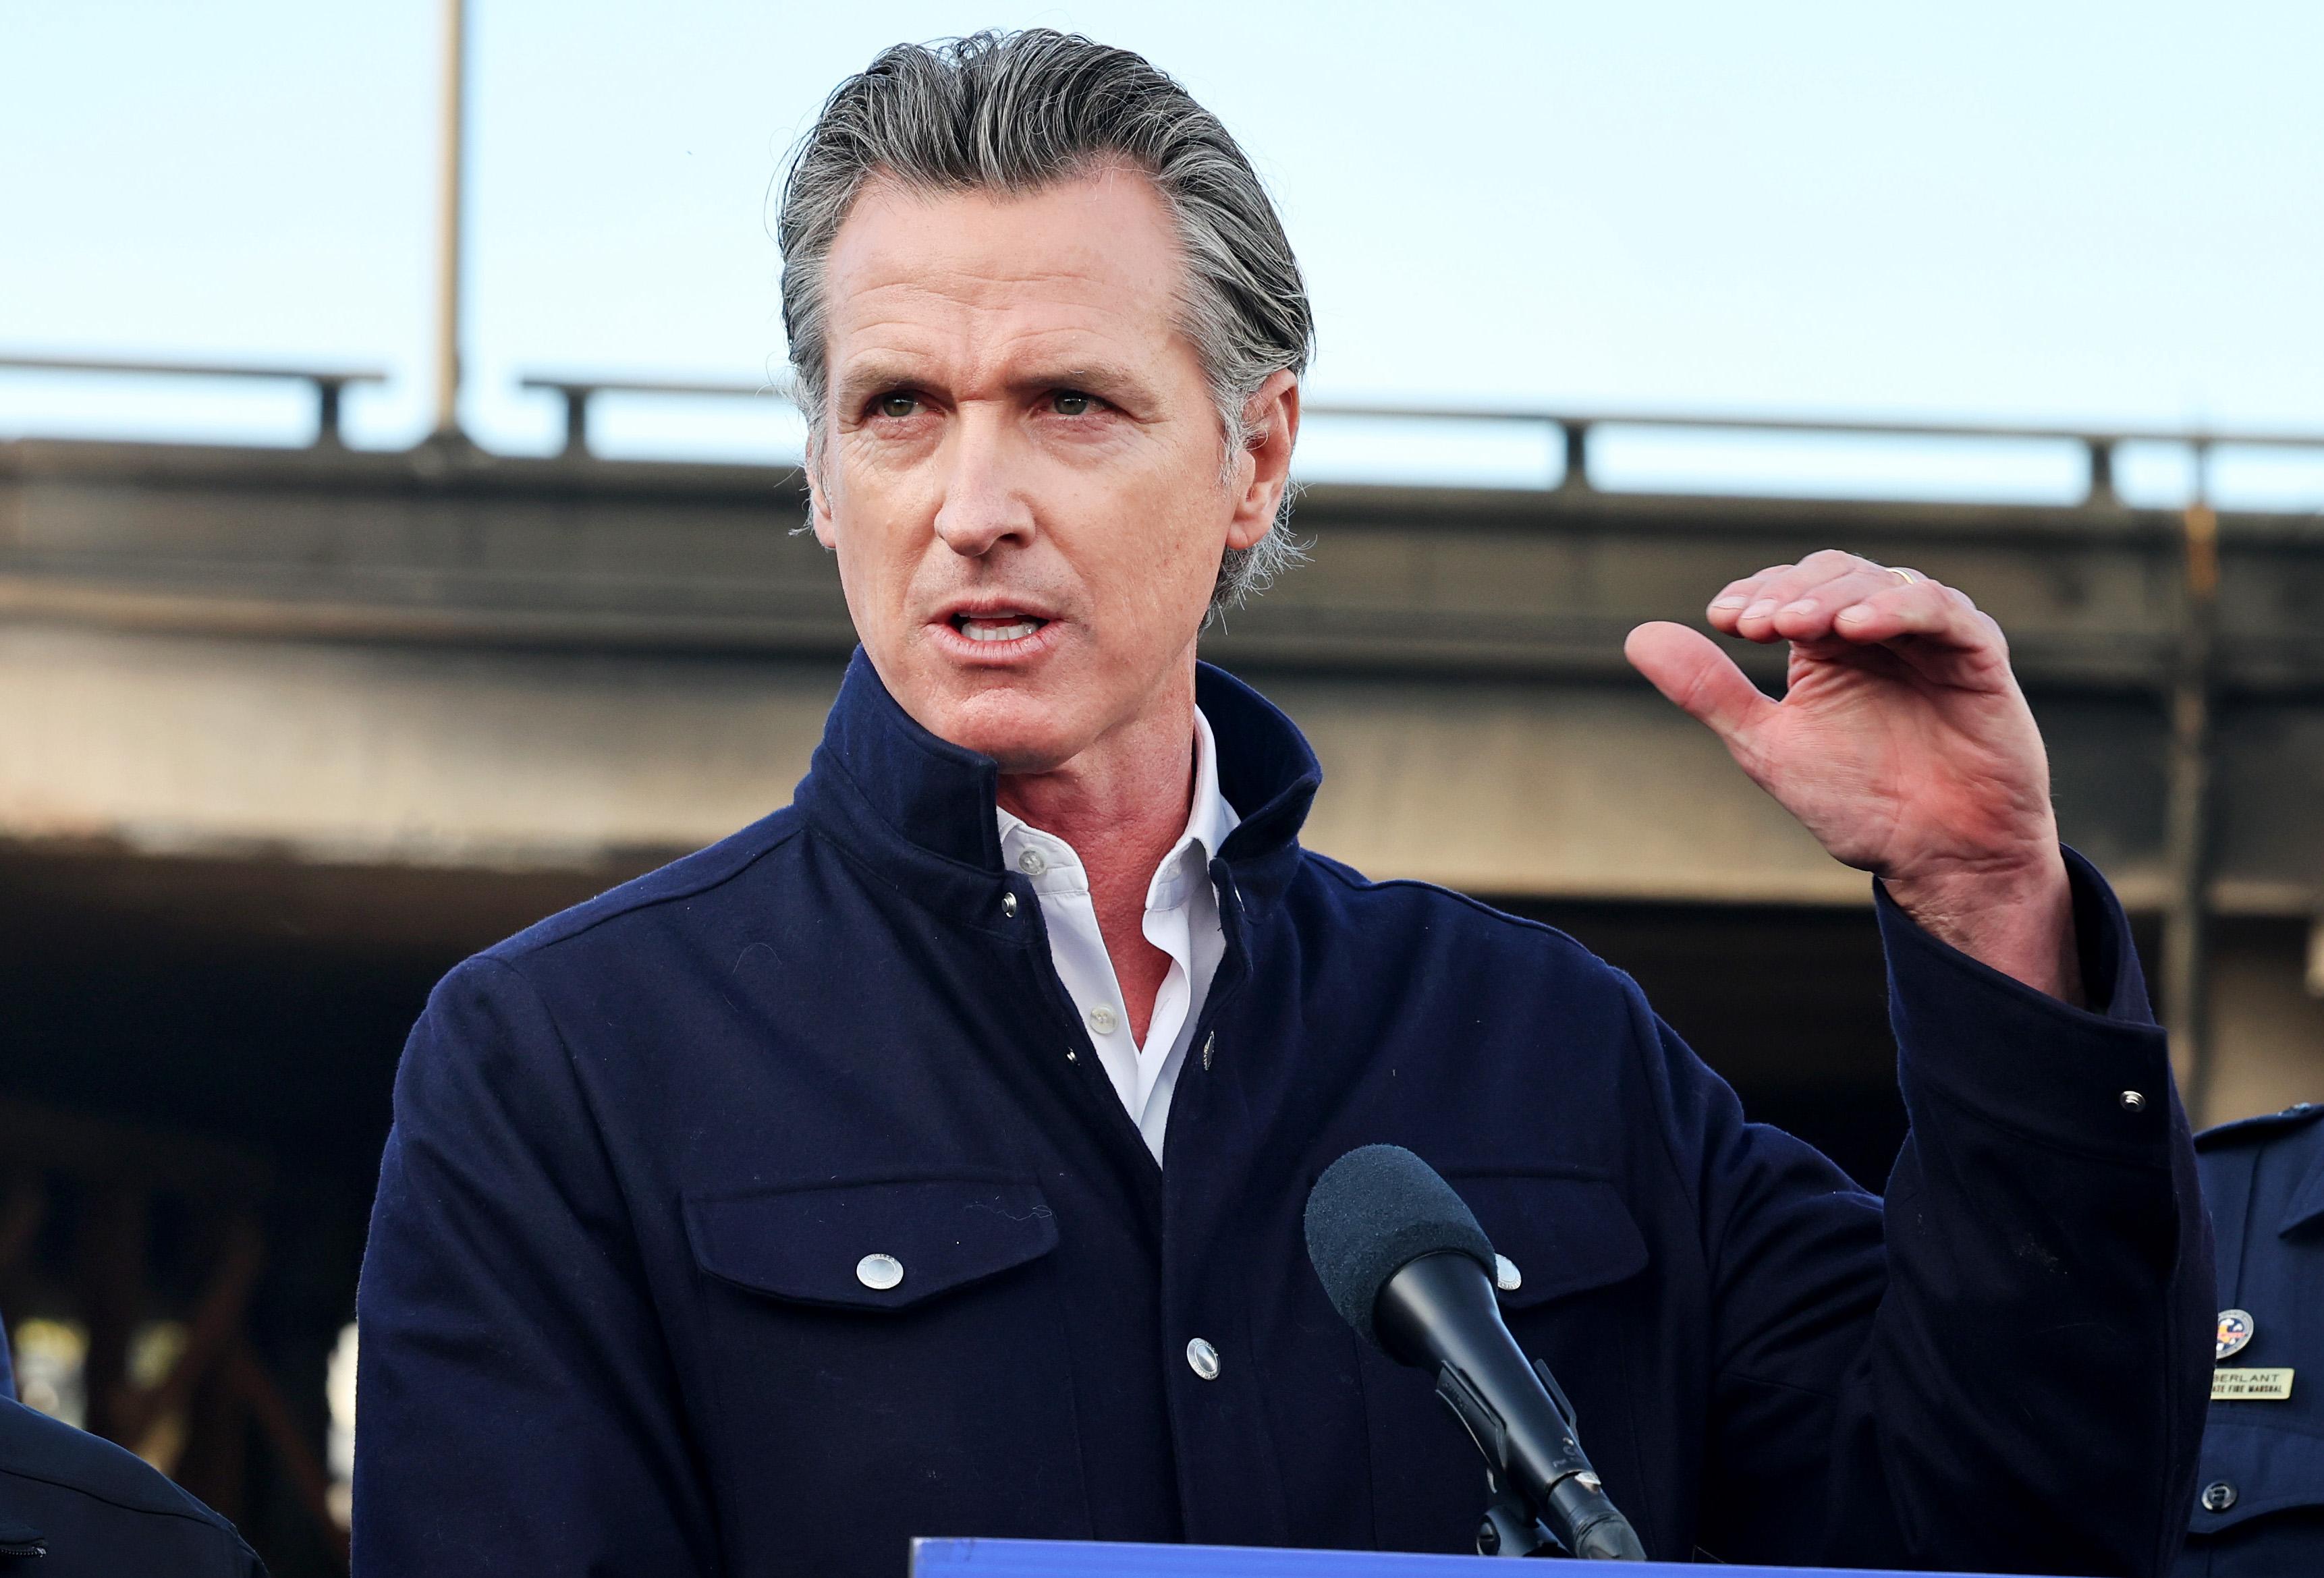 Newsom’s Office Rejects ‘Pay to Play’ Allegations, Says Panera Bread Not Exempt From Fast Food Law